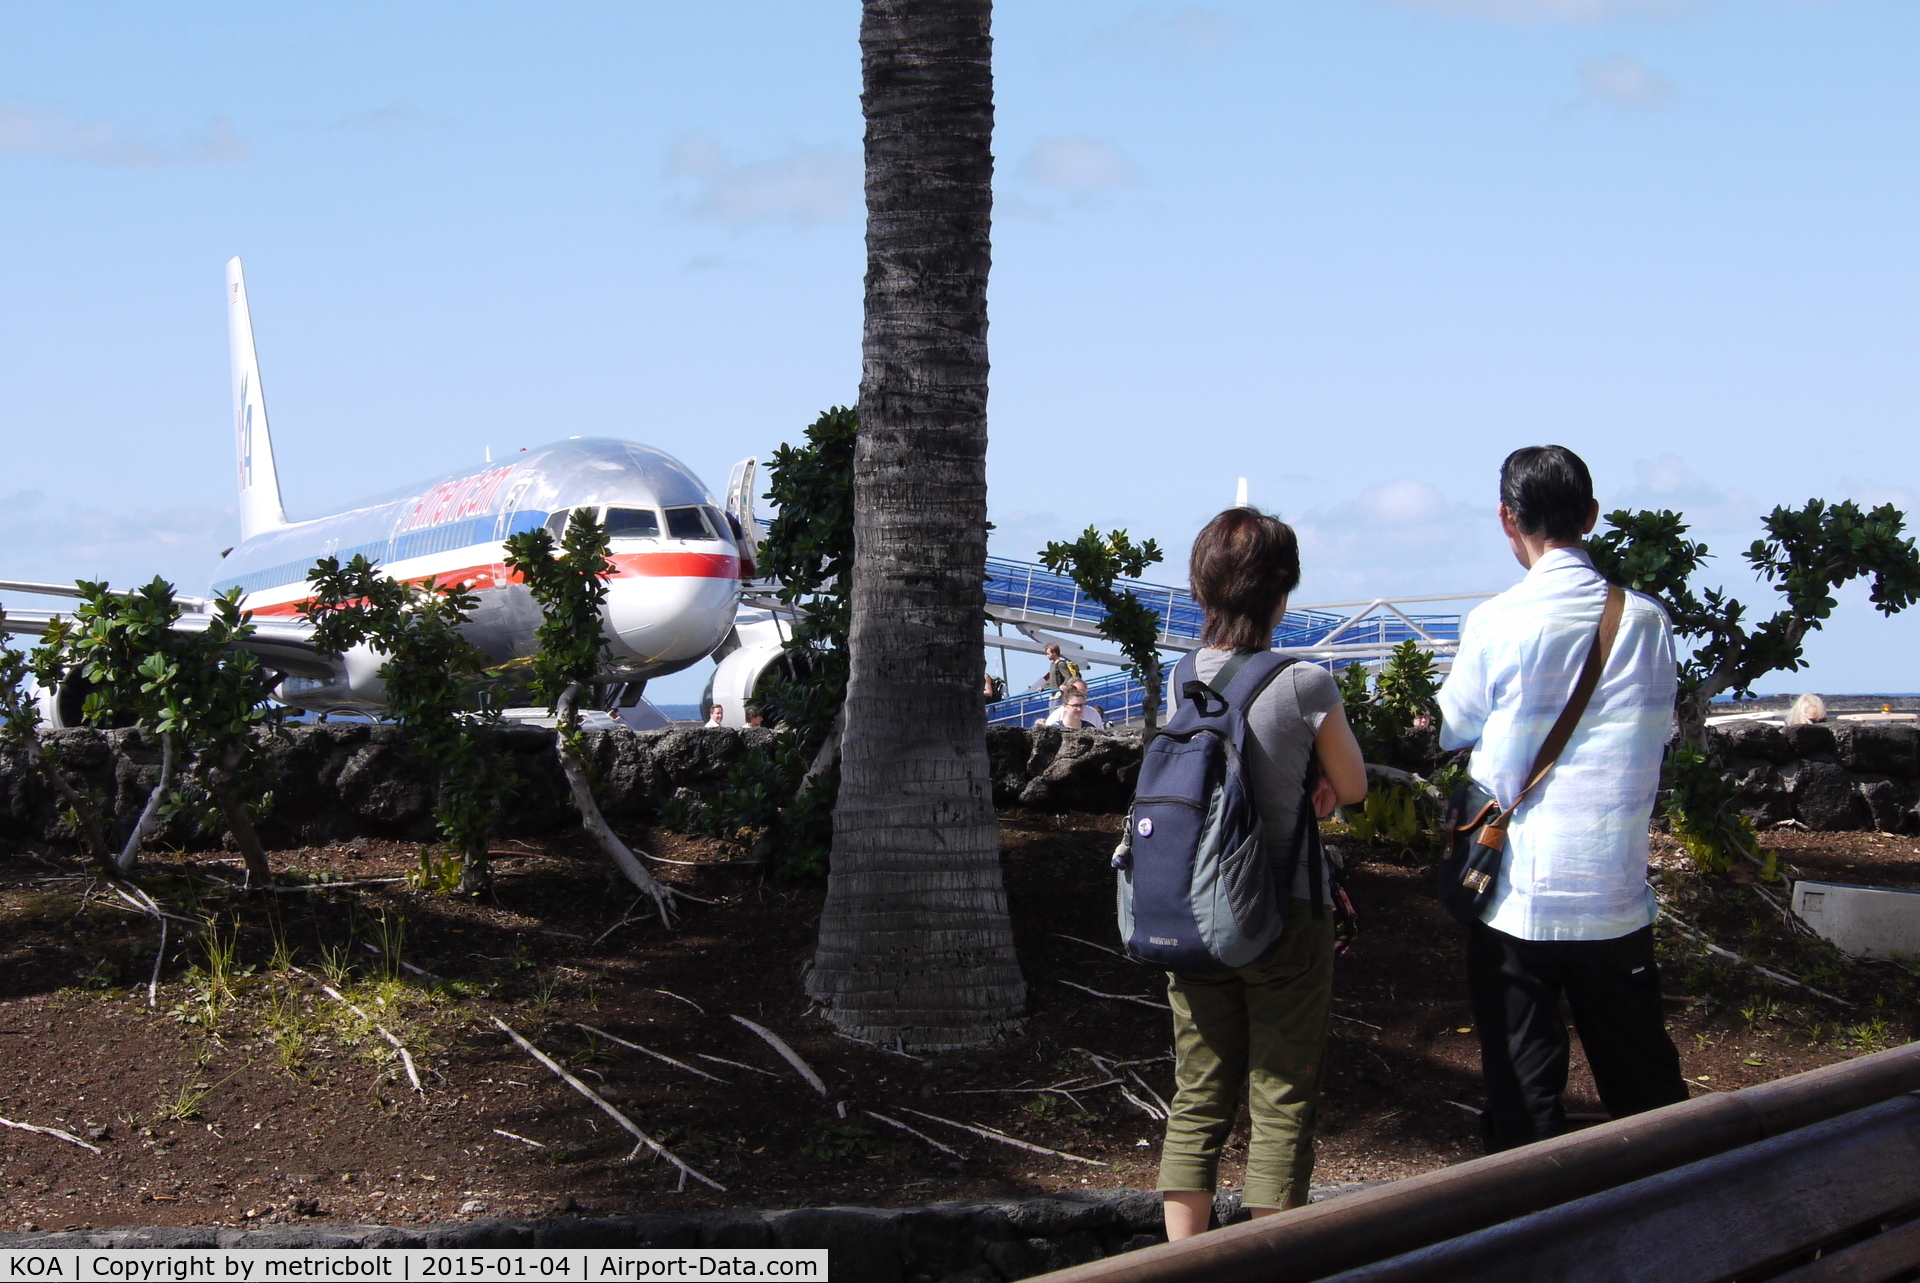 Kona International At Keahole Airport (KOA) - No fences and obstructions offer great view of the ramp